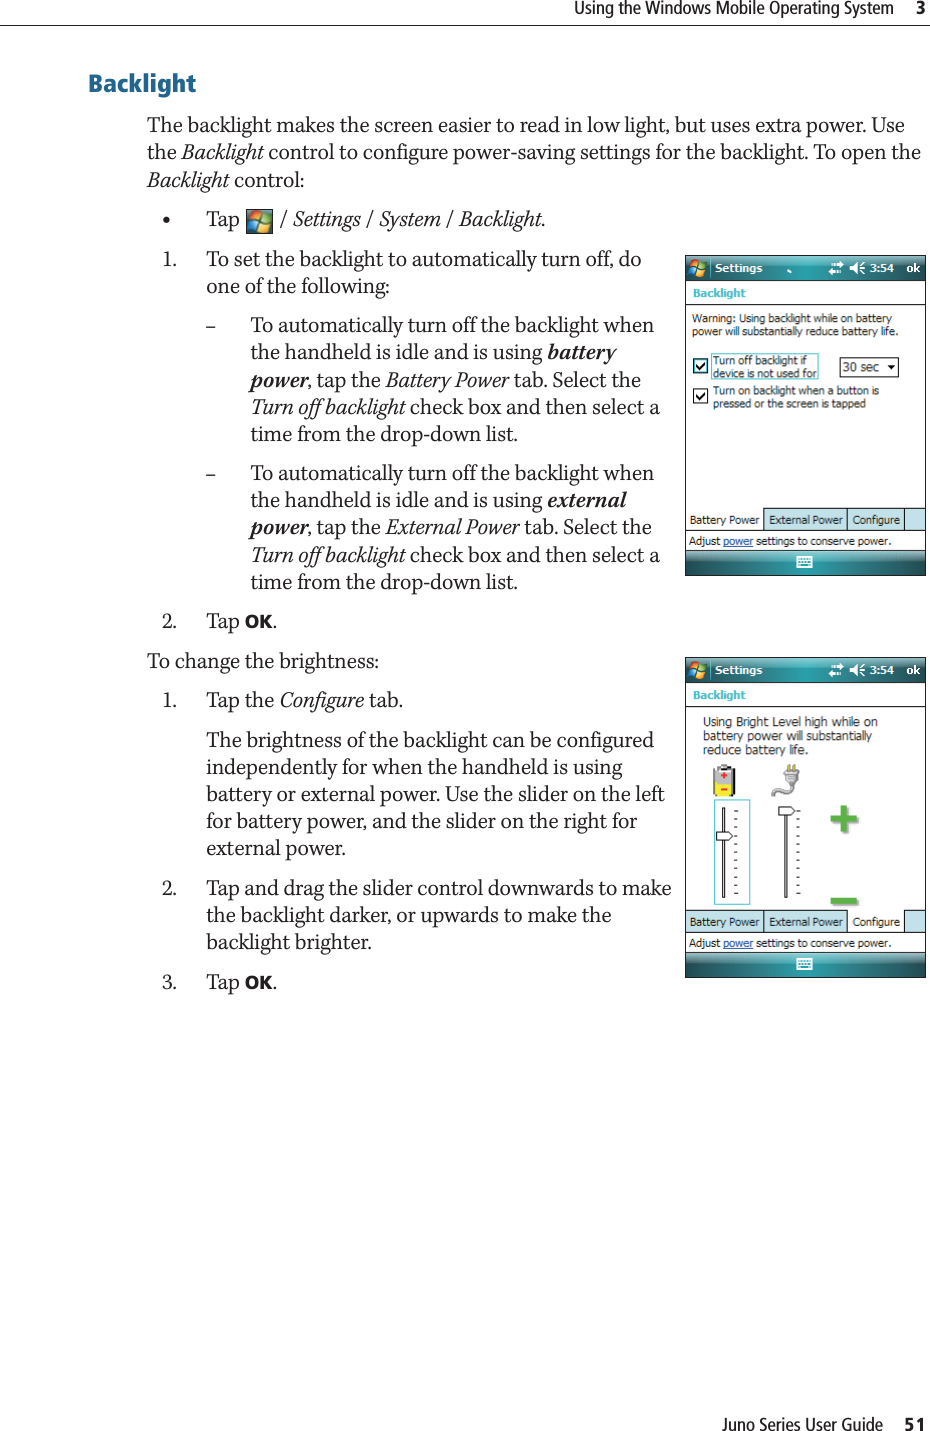 Juno Series User Guide     51Using the Windows Mobile Operating System     3BacklightThe backlight makes the screen easier to read in low light, but uses extra power. Use the Backlight control to configure power-saving settings for the backlight. To open the Backlight control: •Tap / Settings /System / Backlight. 1. To set the backlight to automatically turn off, do one of the following: –To automatically turn off the backlight when the handheld is idle and is using battery power, tap the Battery Power tab. Select the Turn off backlight check box and then select a time from the drop-down list.–To automatically turn off the backlight when the handheld is idle and is using external power, tap the External Power tab. Select the Turn off backlight check box and then select a time from the drop-down list.2. Tap OK.To change the brightness:1. Tap the Configure tab.The brightness of the backlight can be configured independently for when the handheld is using battery or external power. Use the slider on the left for battery power, and the slider on the right for external power.2. Tap and drag the slider control downwards to make the backlight darker, or upwards to make the backlight brighter. 3. Tap OK.